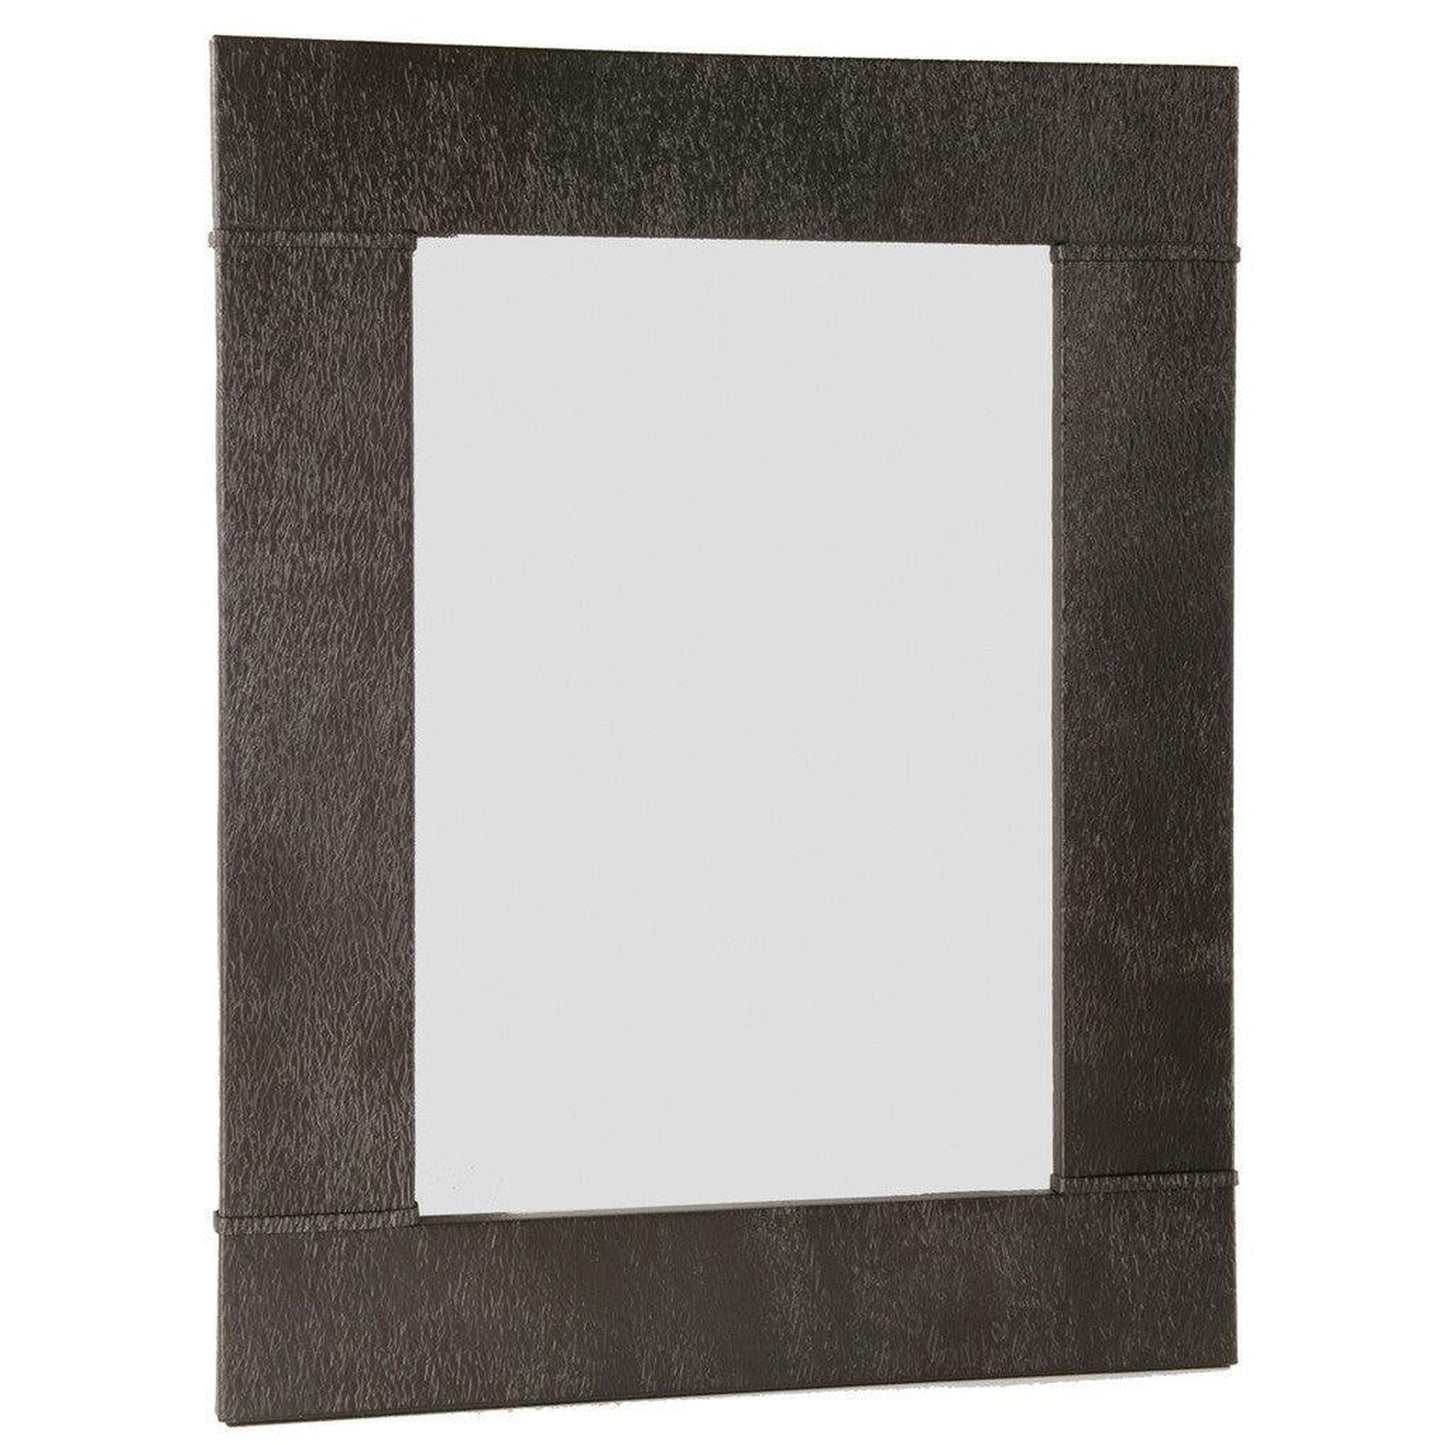 Stone County Ironworks Cedarvale 31" x 35" Small Woodland Brown Iron Wall Mirror With Pewter Iron Accent